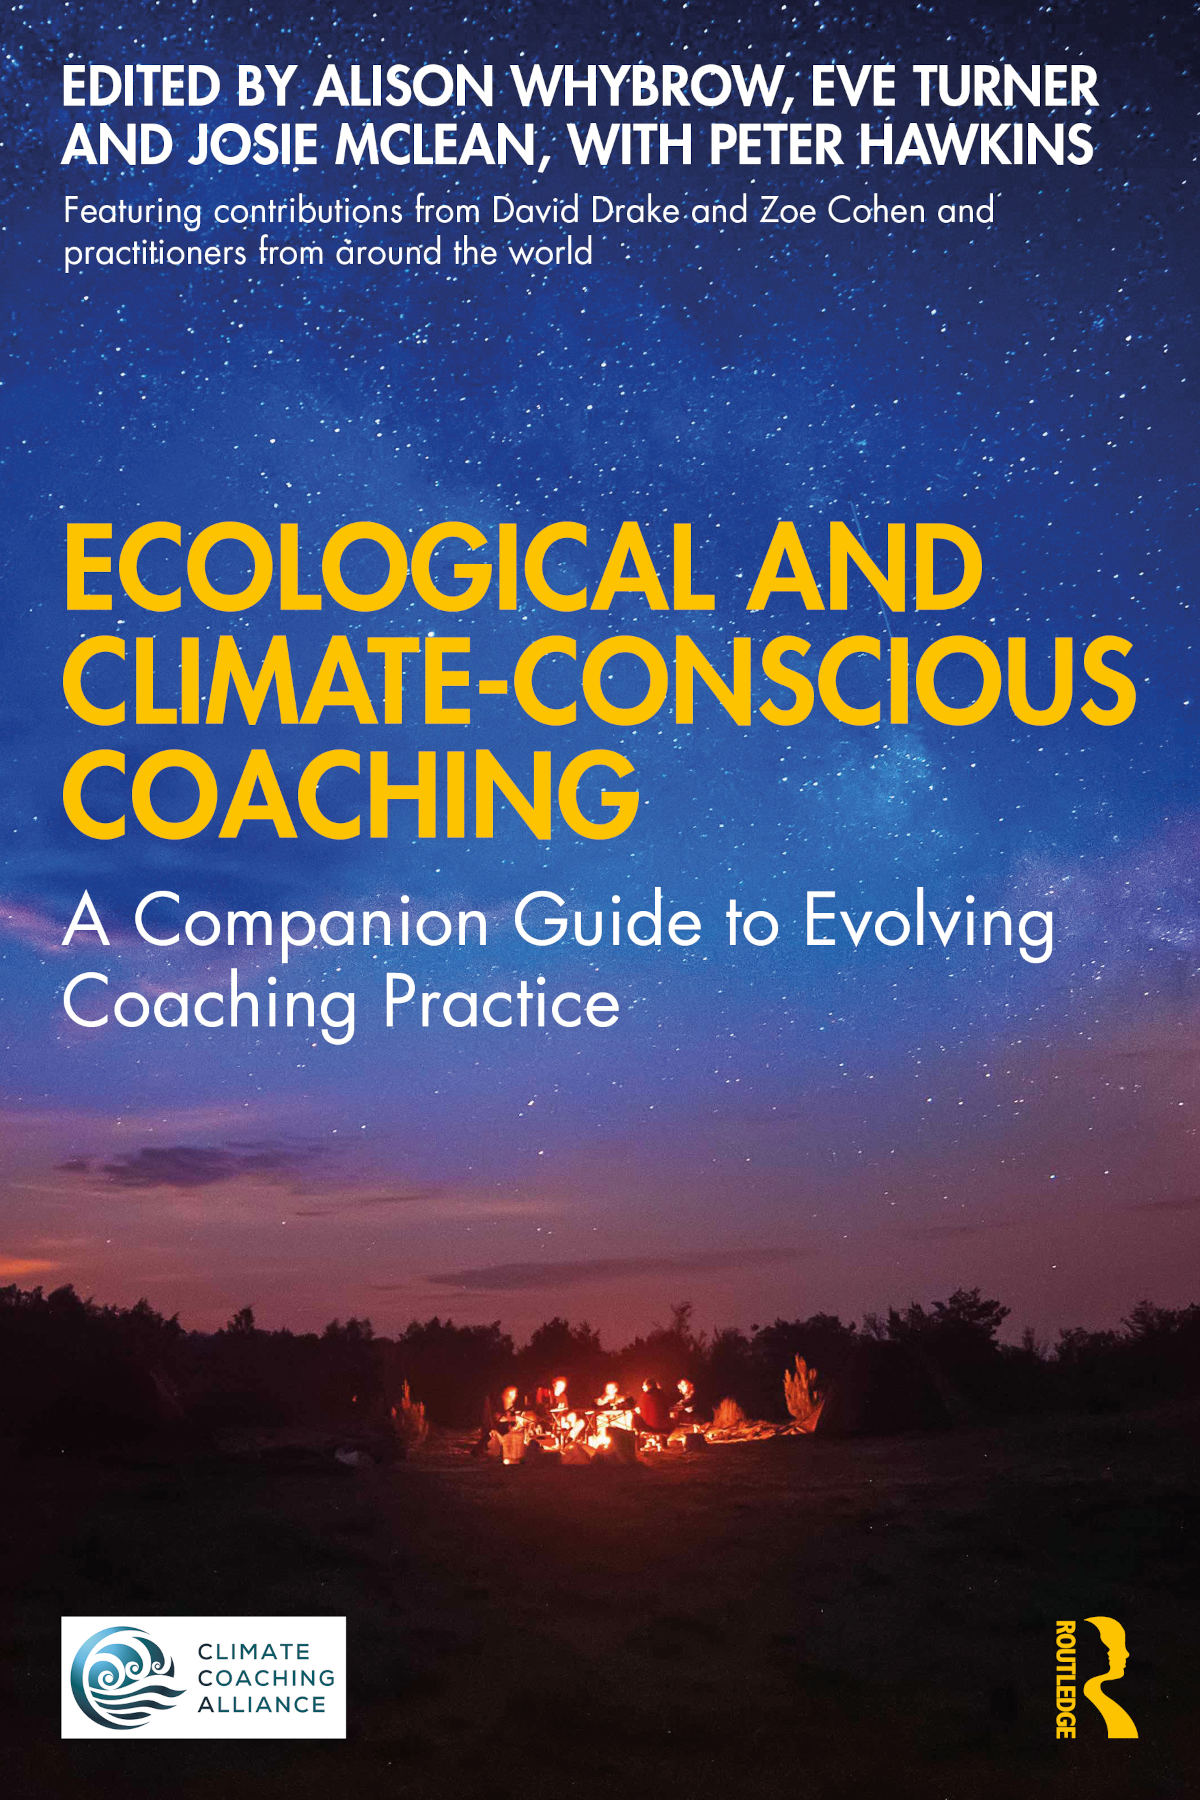 CCA BOOK LAUNCH EVENT “Ecological and Climate-Conscious Coaching – A Companion Guide to Evolving Coaching Practice”